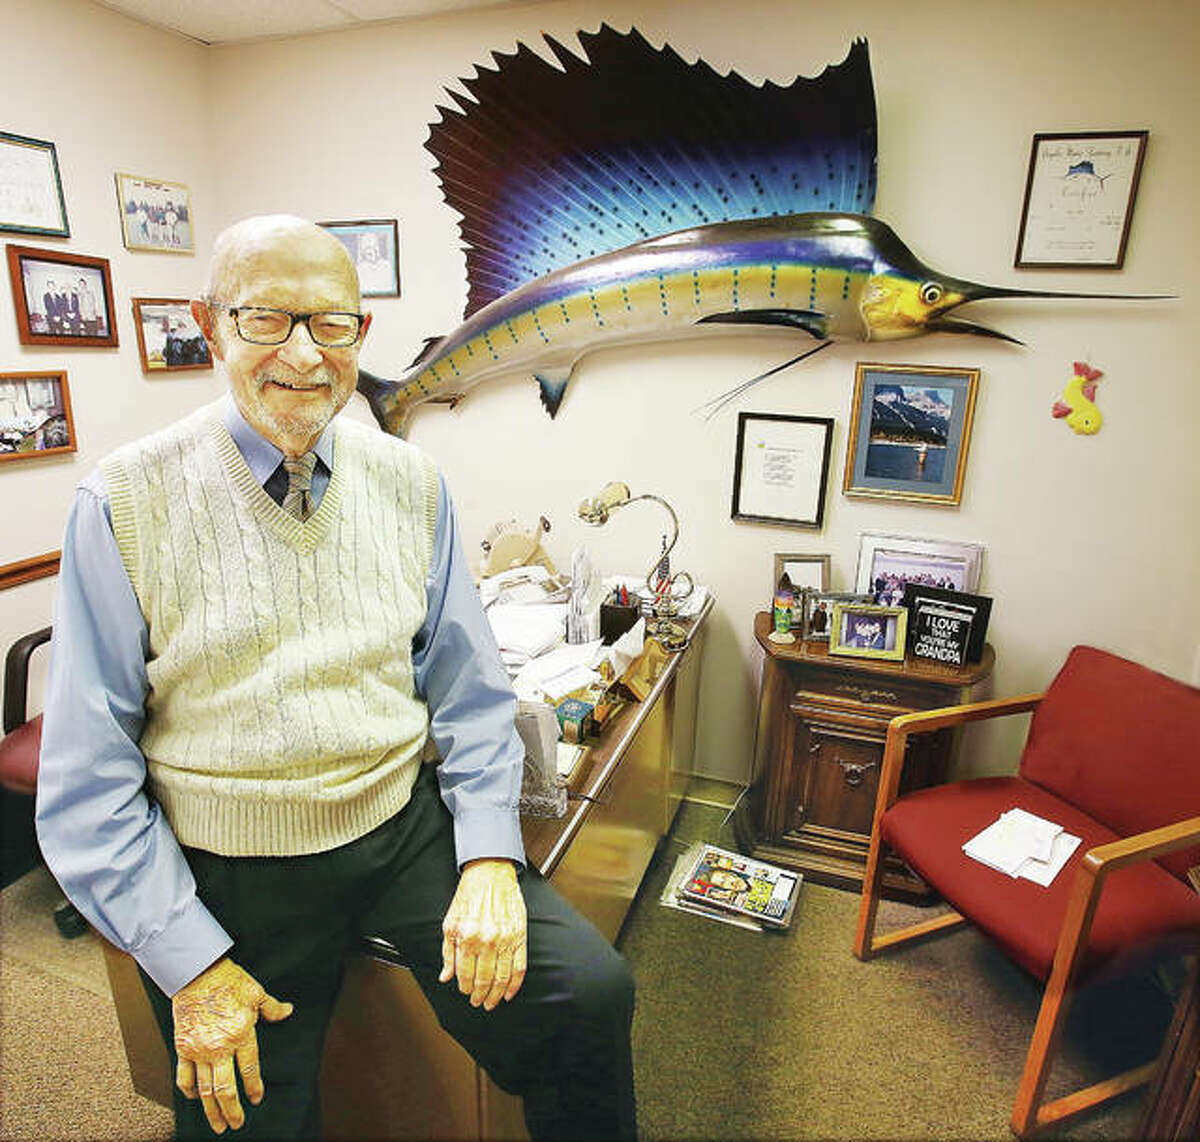 Chuck Heitz, who opened Heitz Optical in Alton in 1956, will celebrate his 95th birthday on Tuesday, Jan. 30. Heitz has been a fixture in the local optical industry since he opened his Alton business 62 years ago.